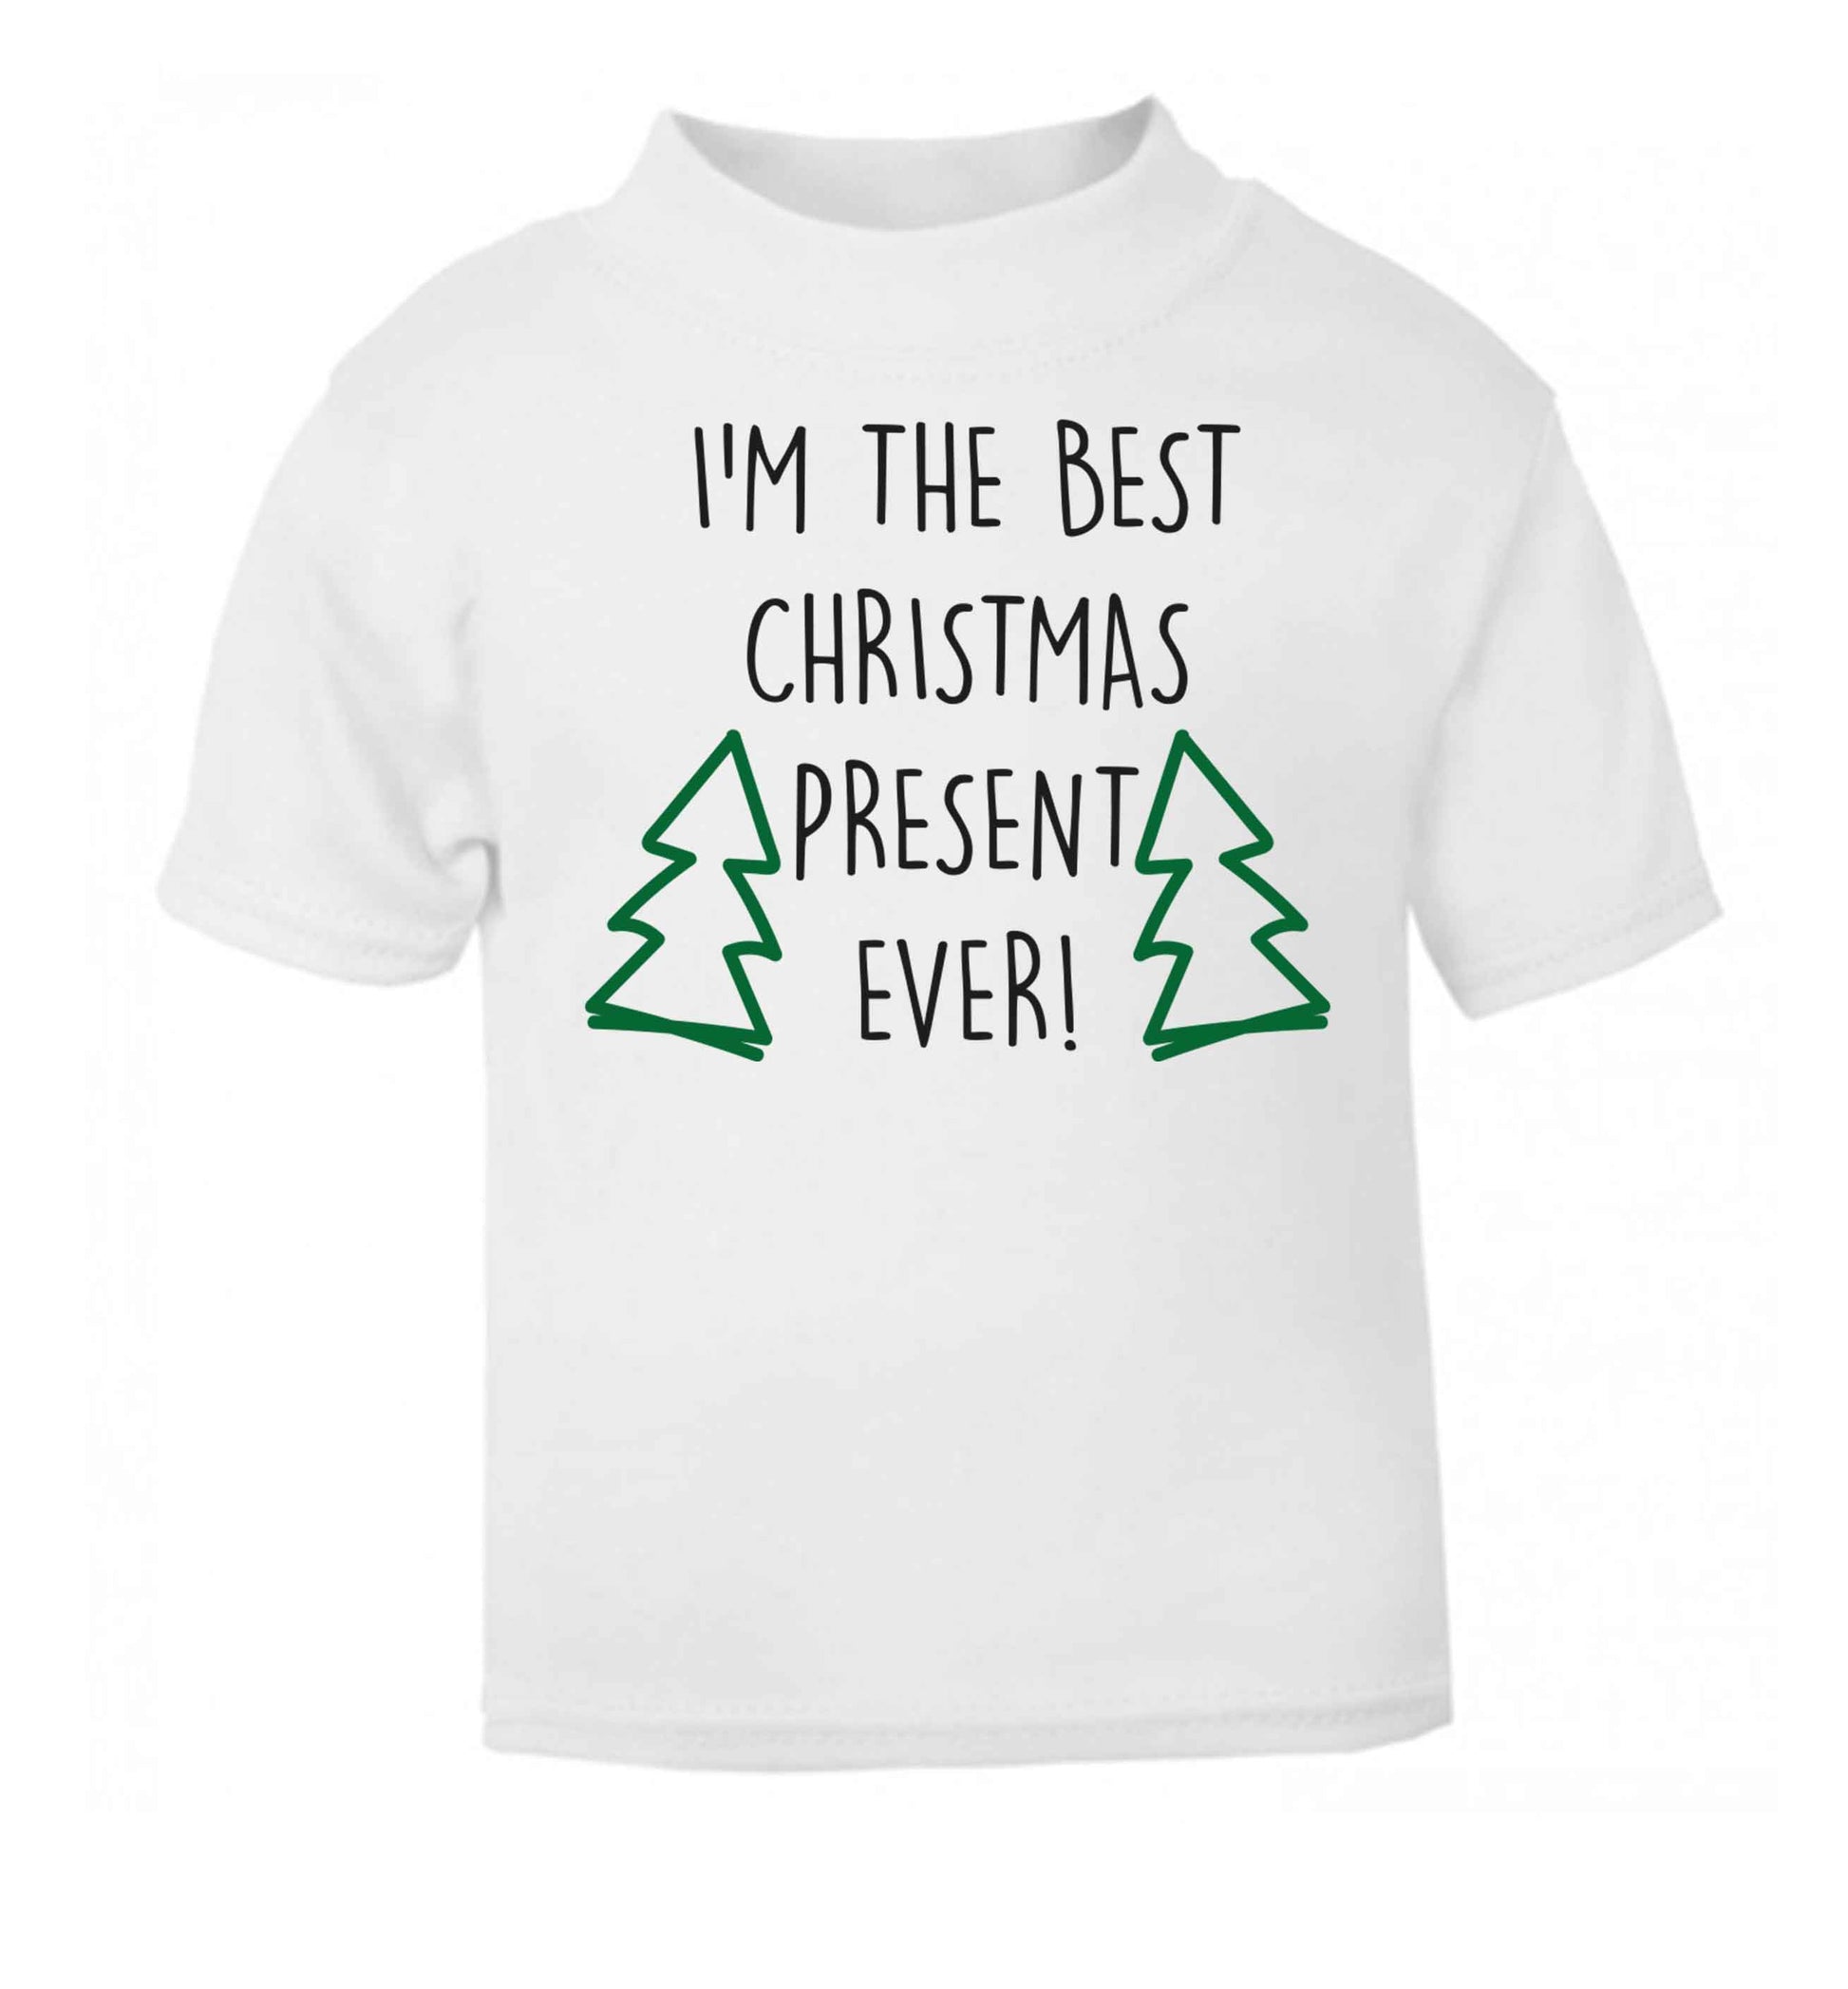 I'm the best Christmas present ever white baby toddler Tshirt 2 Years